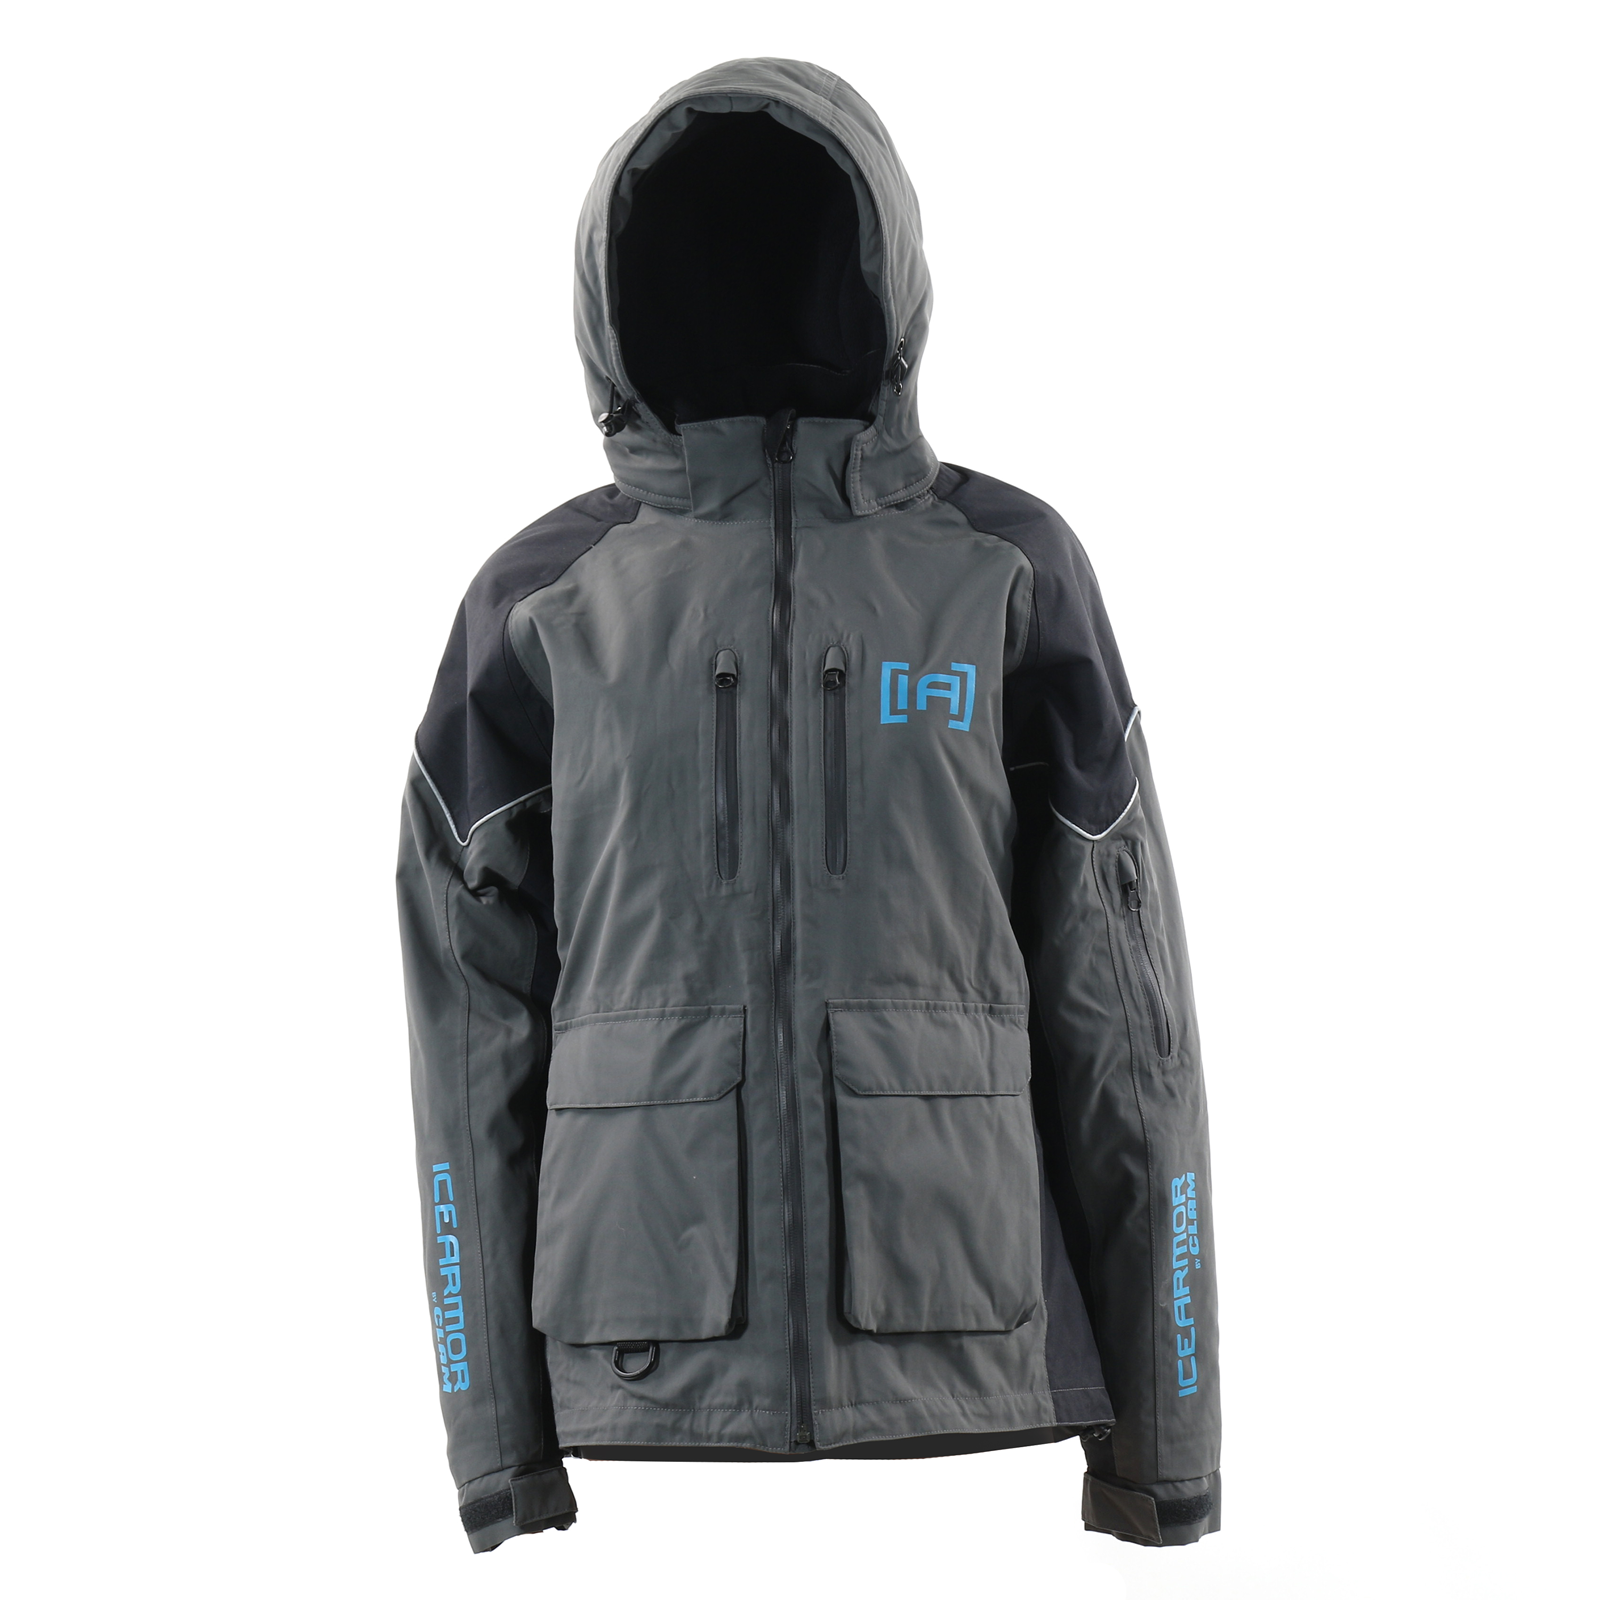 https://static.upnorthsports.com/Image/catimages/16166-16170_Womens-Rise-Parka_1-1600.png